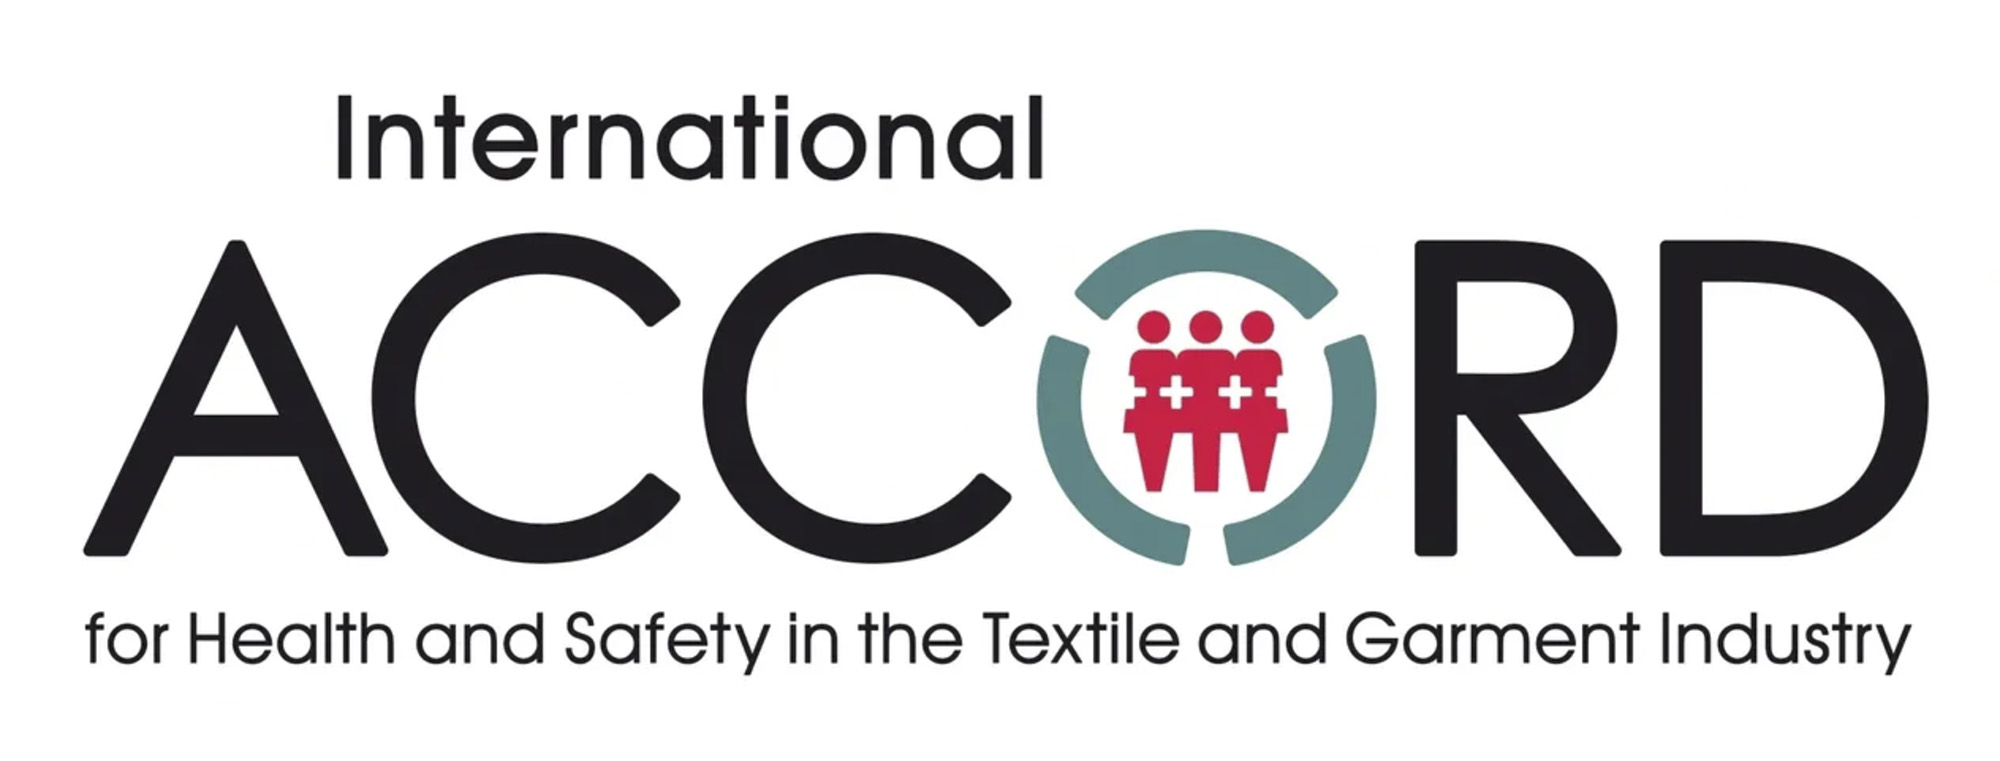 international accord on safety in the textile and garment industry